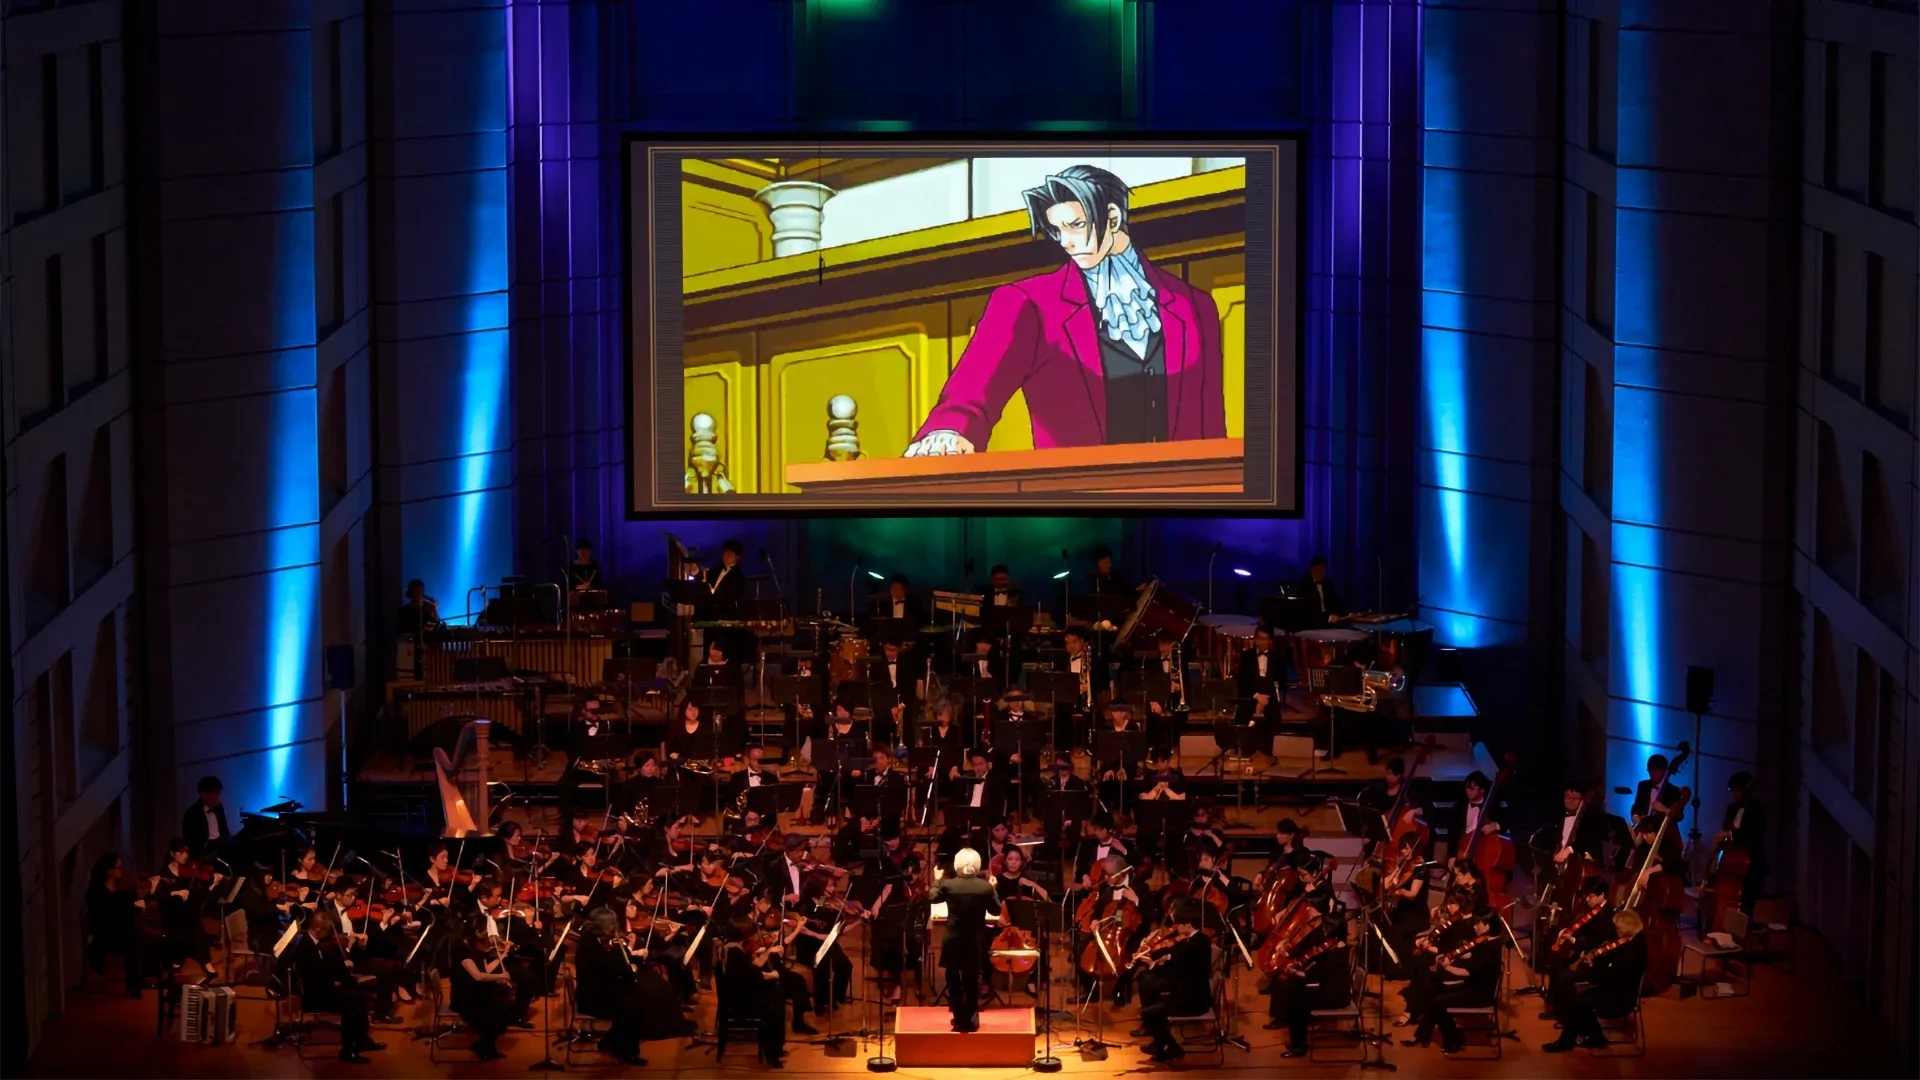 Phoenix-Wright-Ace-Attorney-20th-Anniversary-Concert-May-2022